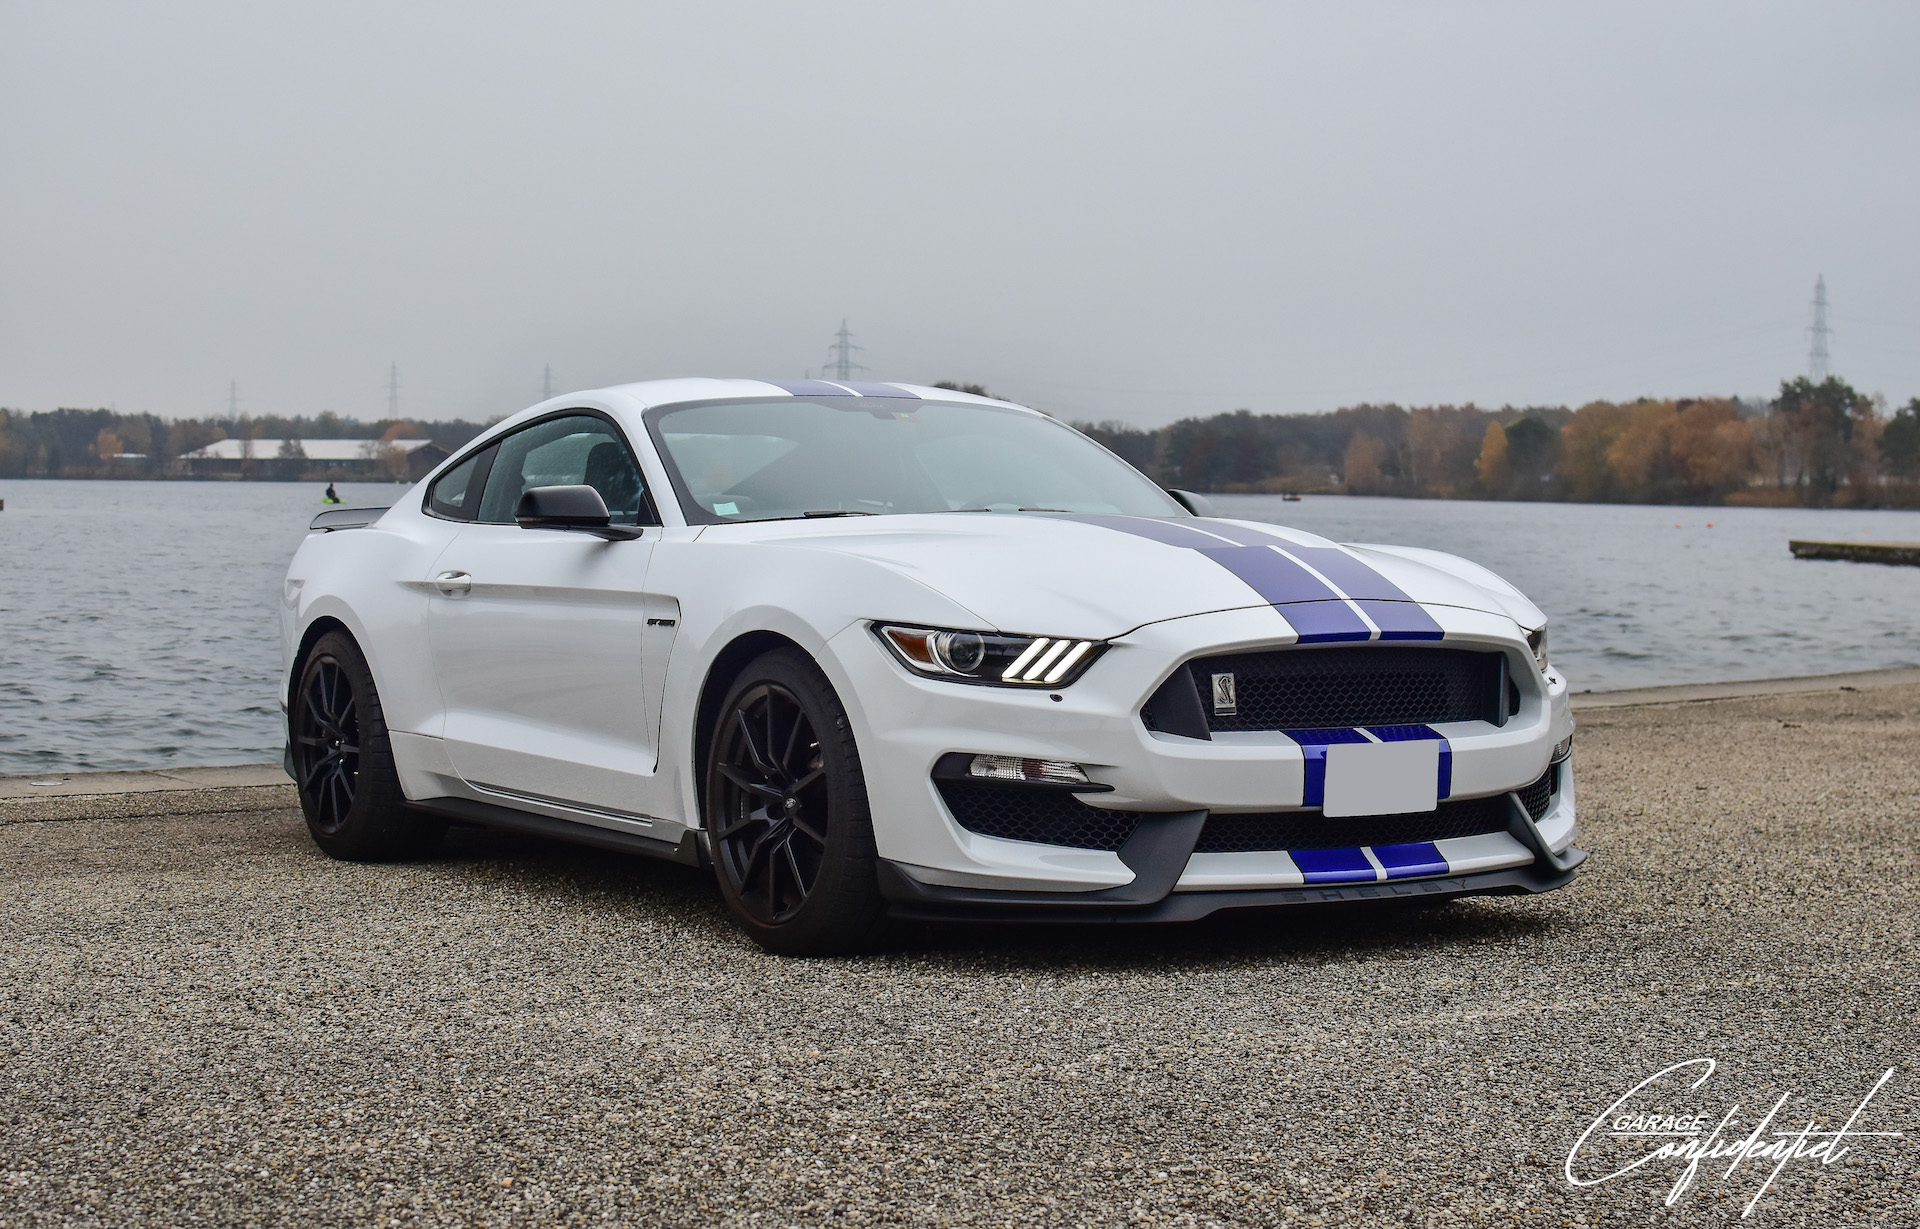 Ford Mustang Shelby GT350 - Garage Confidentiel